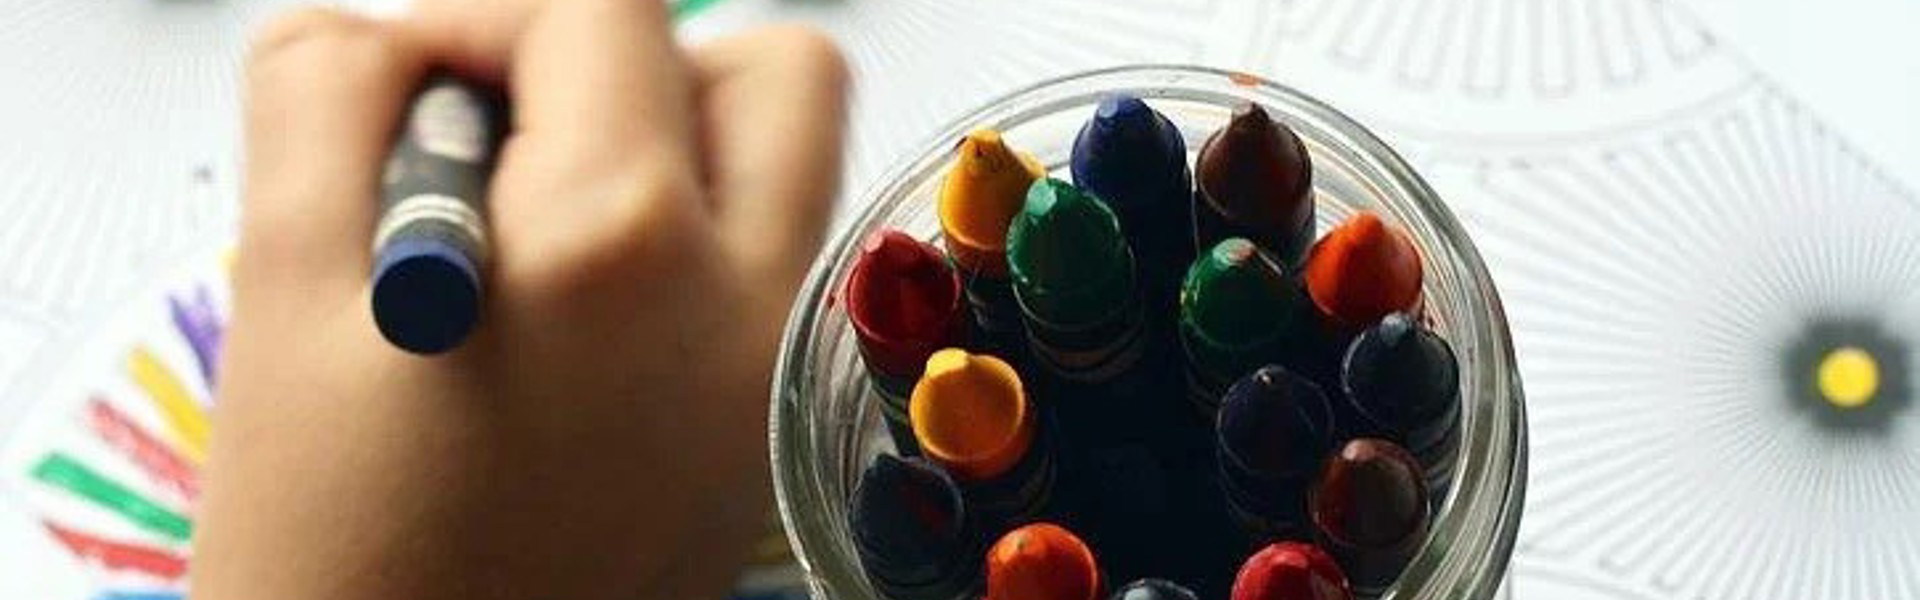 a hand holding a crayon and drawing on paper with a pot of multicoloured crayons next to it